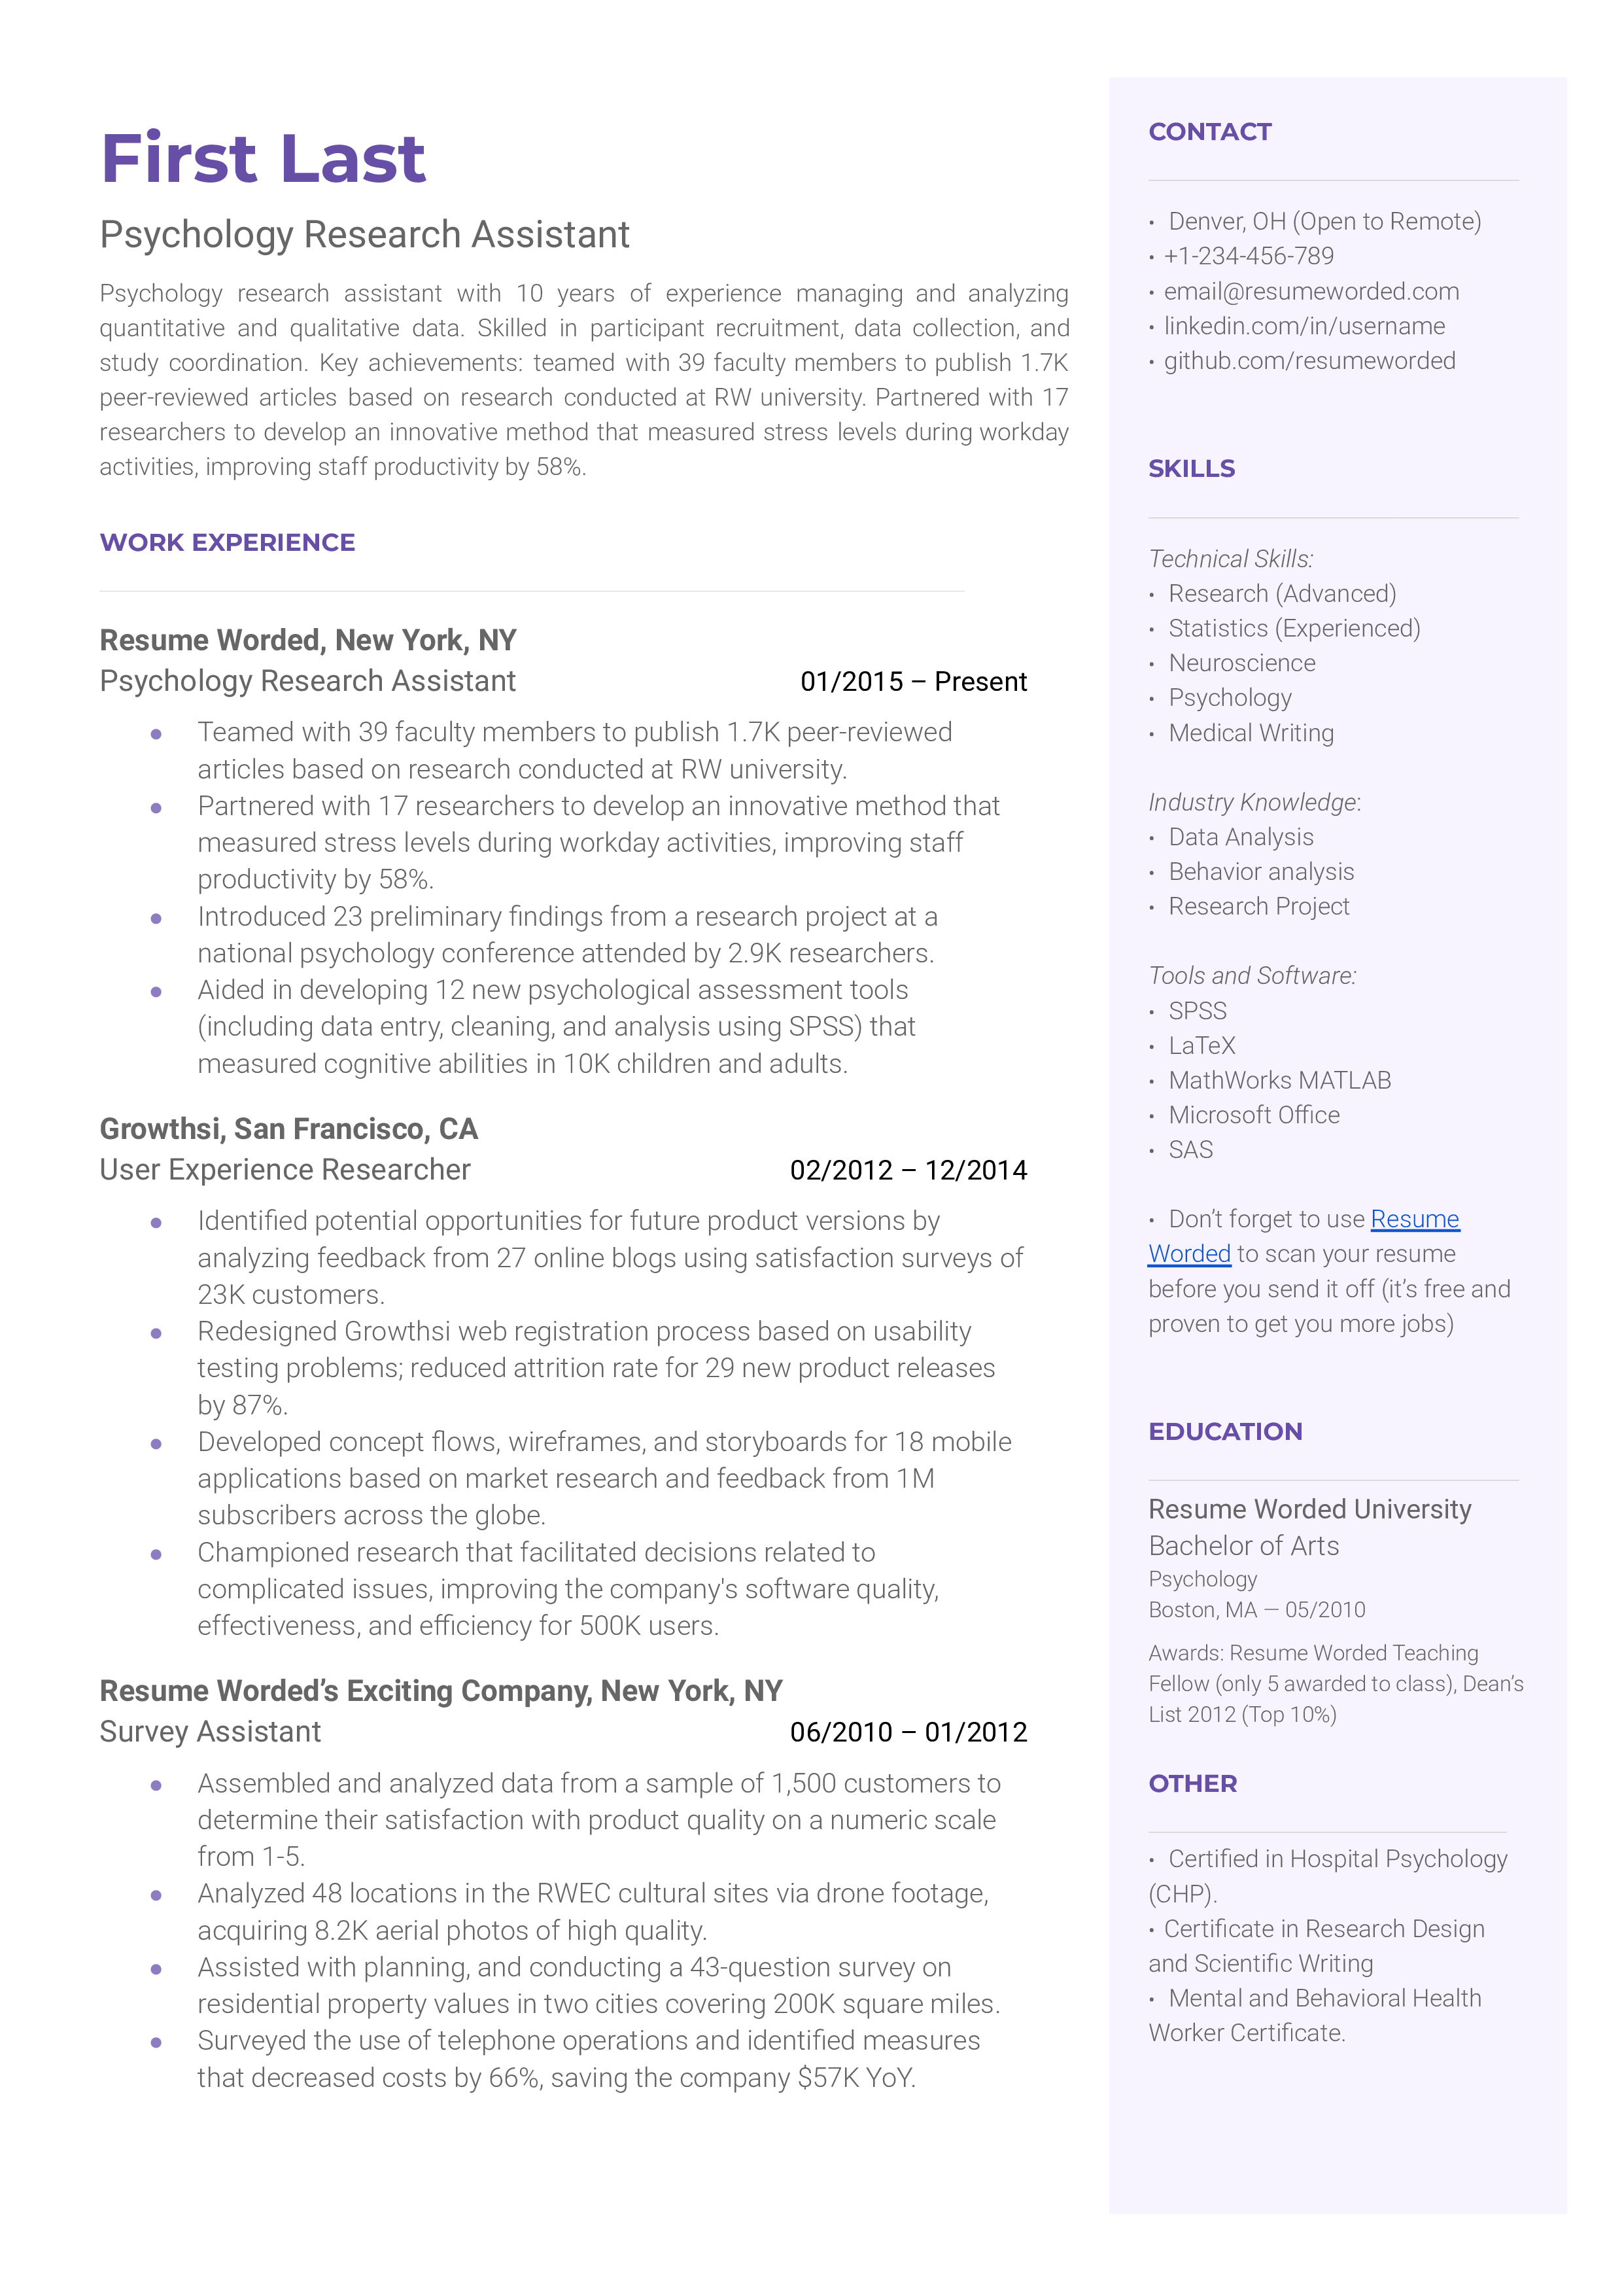 A resume for a psychology research assistant featuring a degree in psychology, past work experience as a suvery assistant.